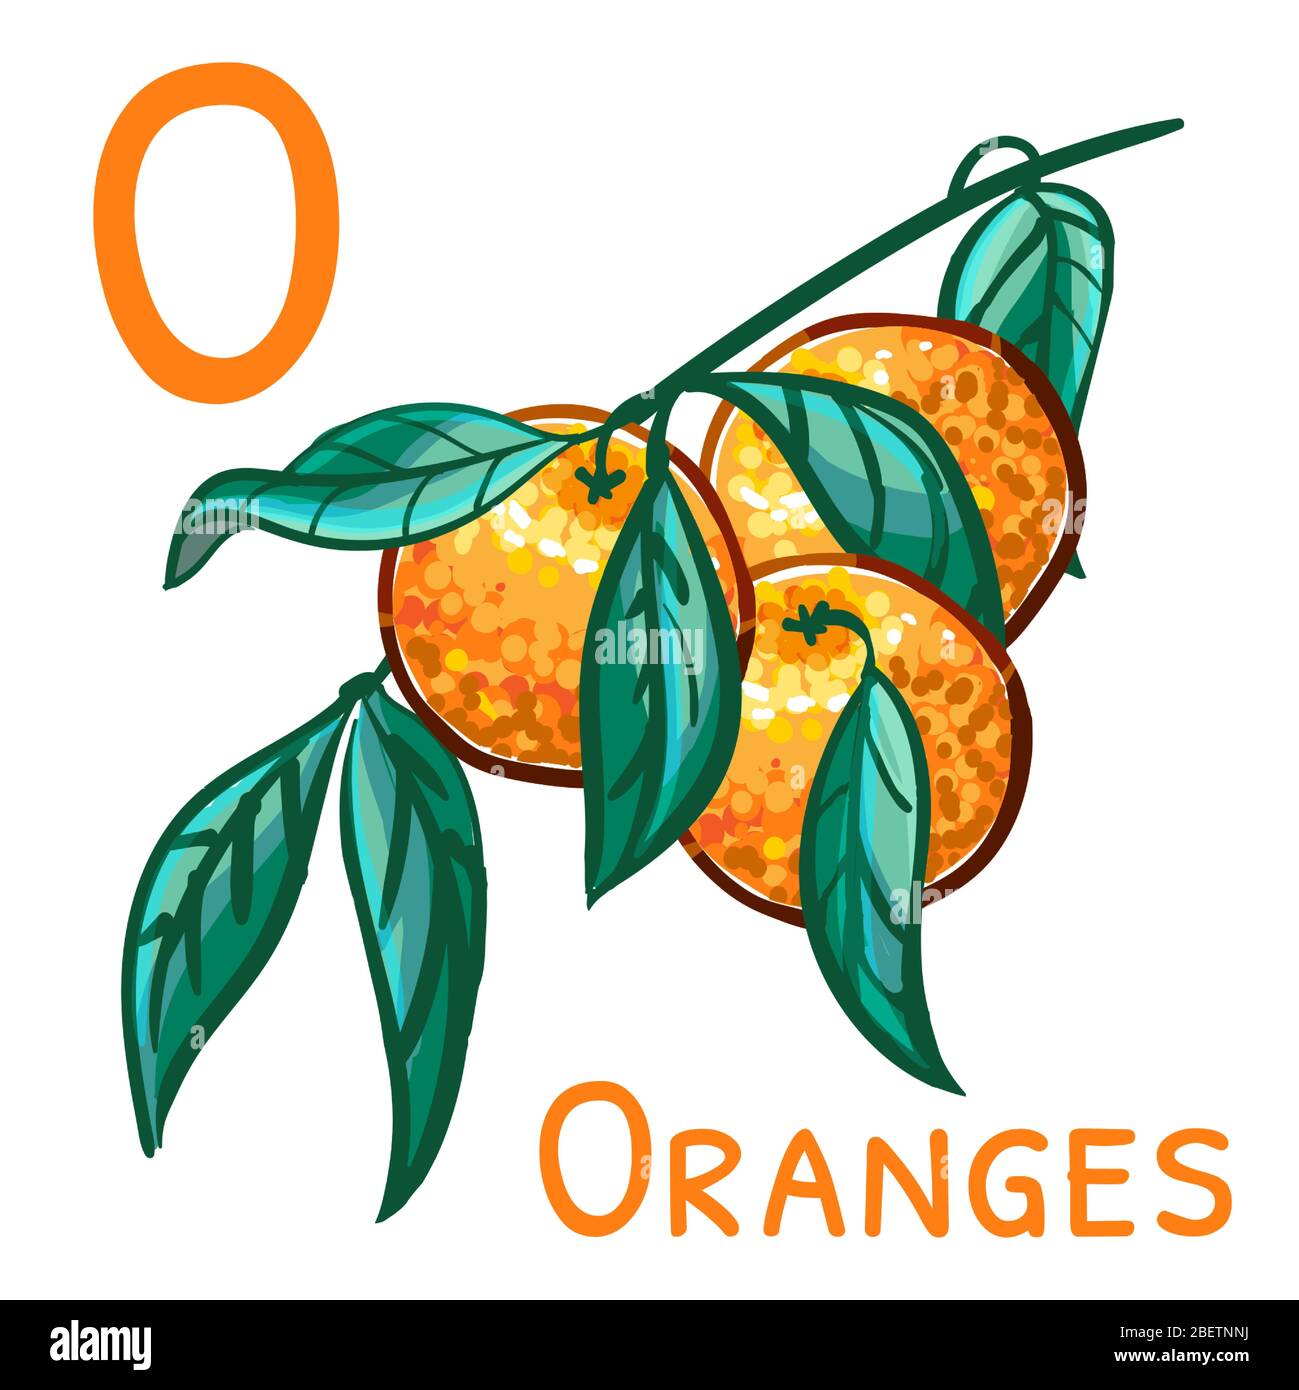 Letter o from the english alphabet, word cards - oranges. Vector Illustration with a branch of oranges for a childrens book. Stock Vector